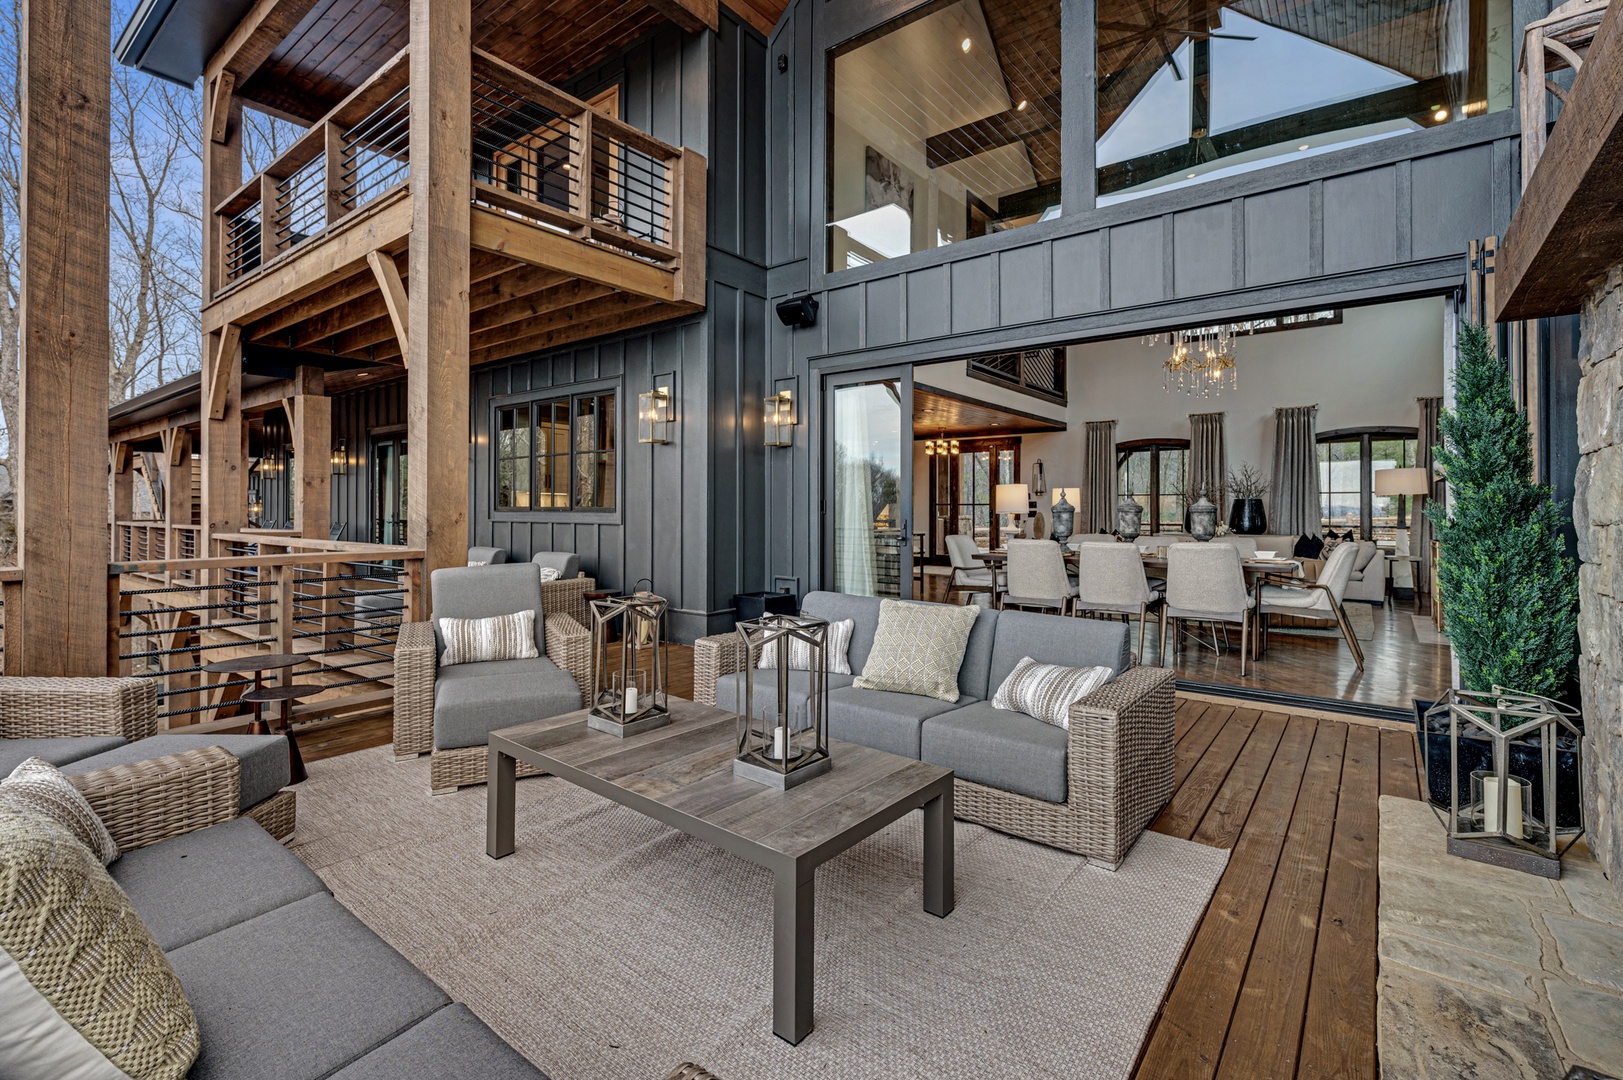 The Sanctuary: Entry Level Deck Luxury Outdoor Seating